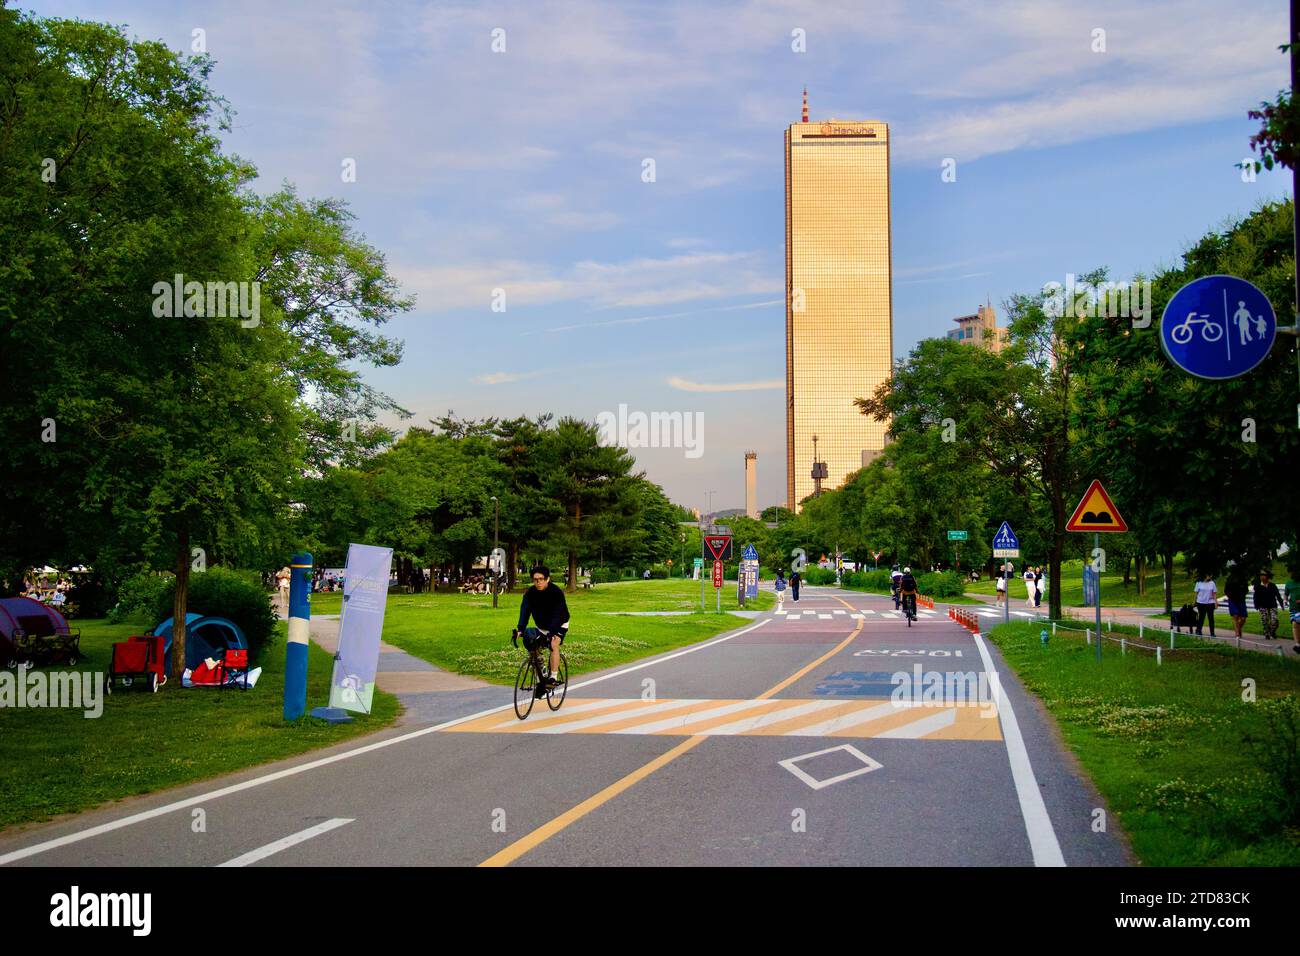 Seoul, South Korea - June 3, 2023: The iconic 63 Building with its gold-tinted windows stands tall beside the scenic bike path in Yeouido, under a cle Stock Photo